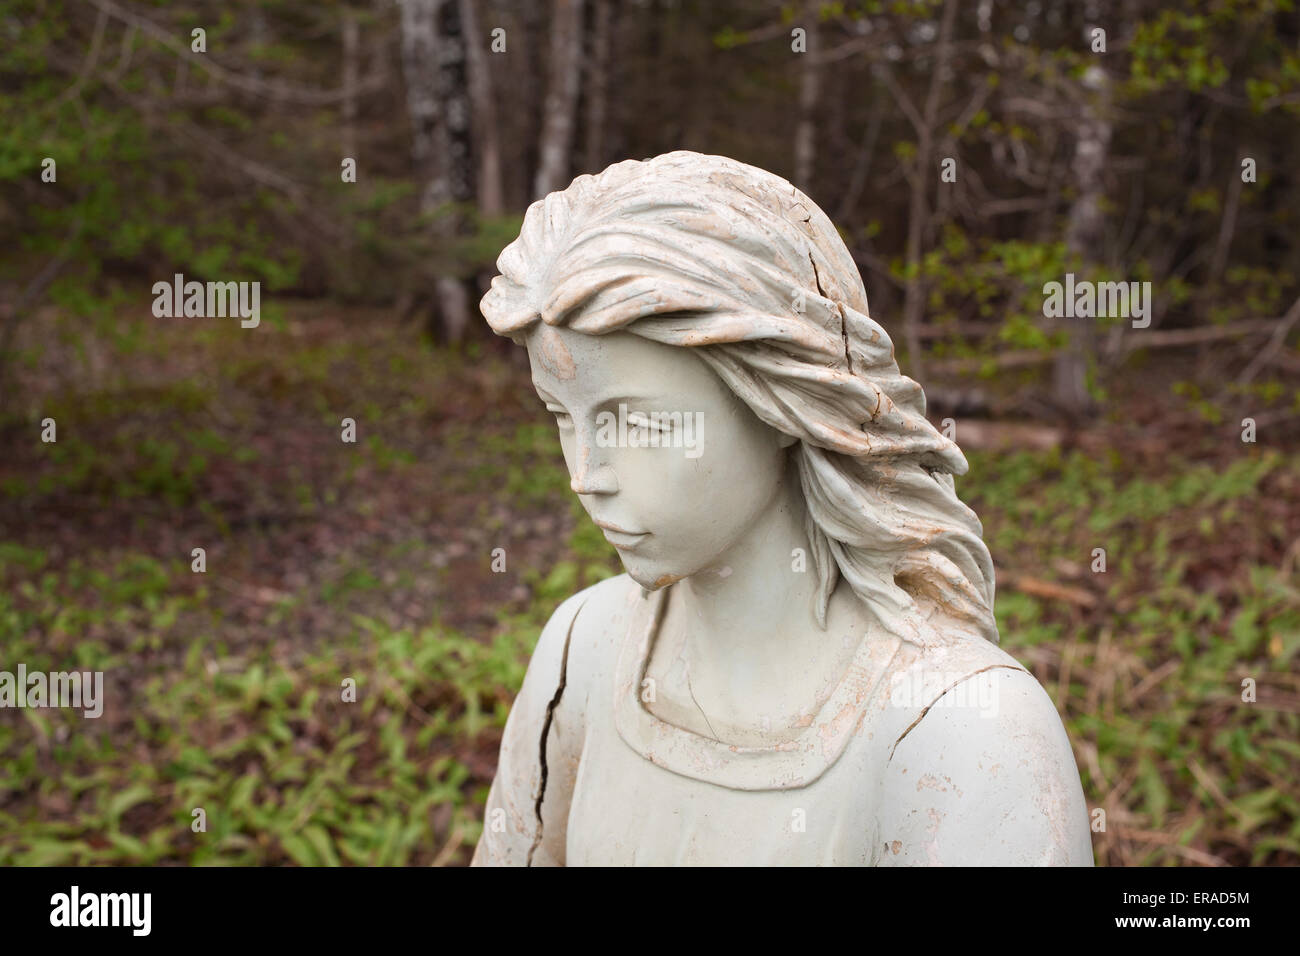 Angel statue portrait in wooded setting. Stock Photo